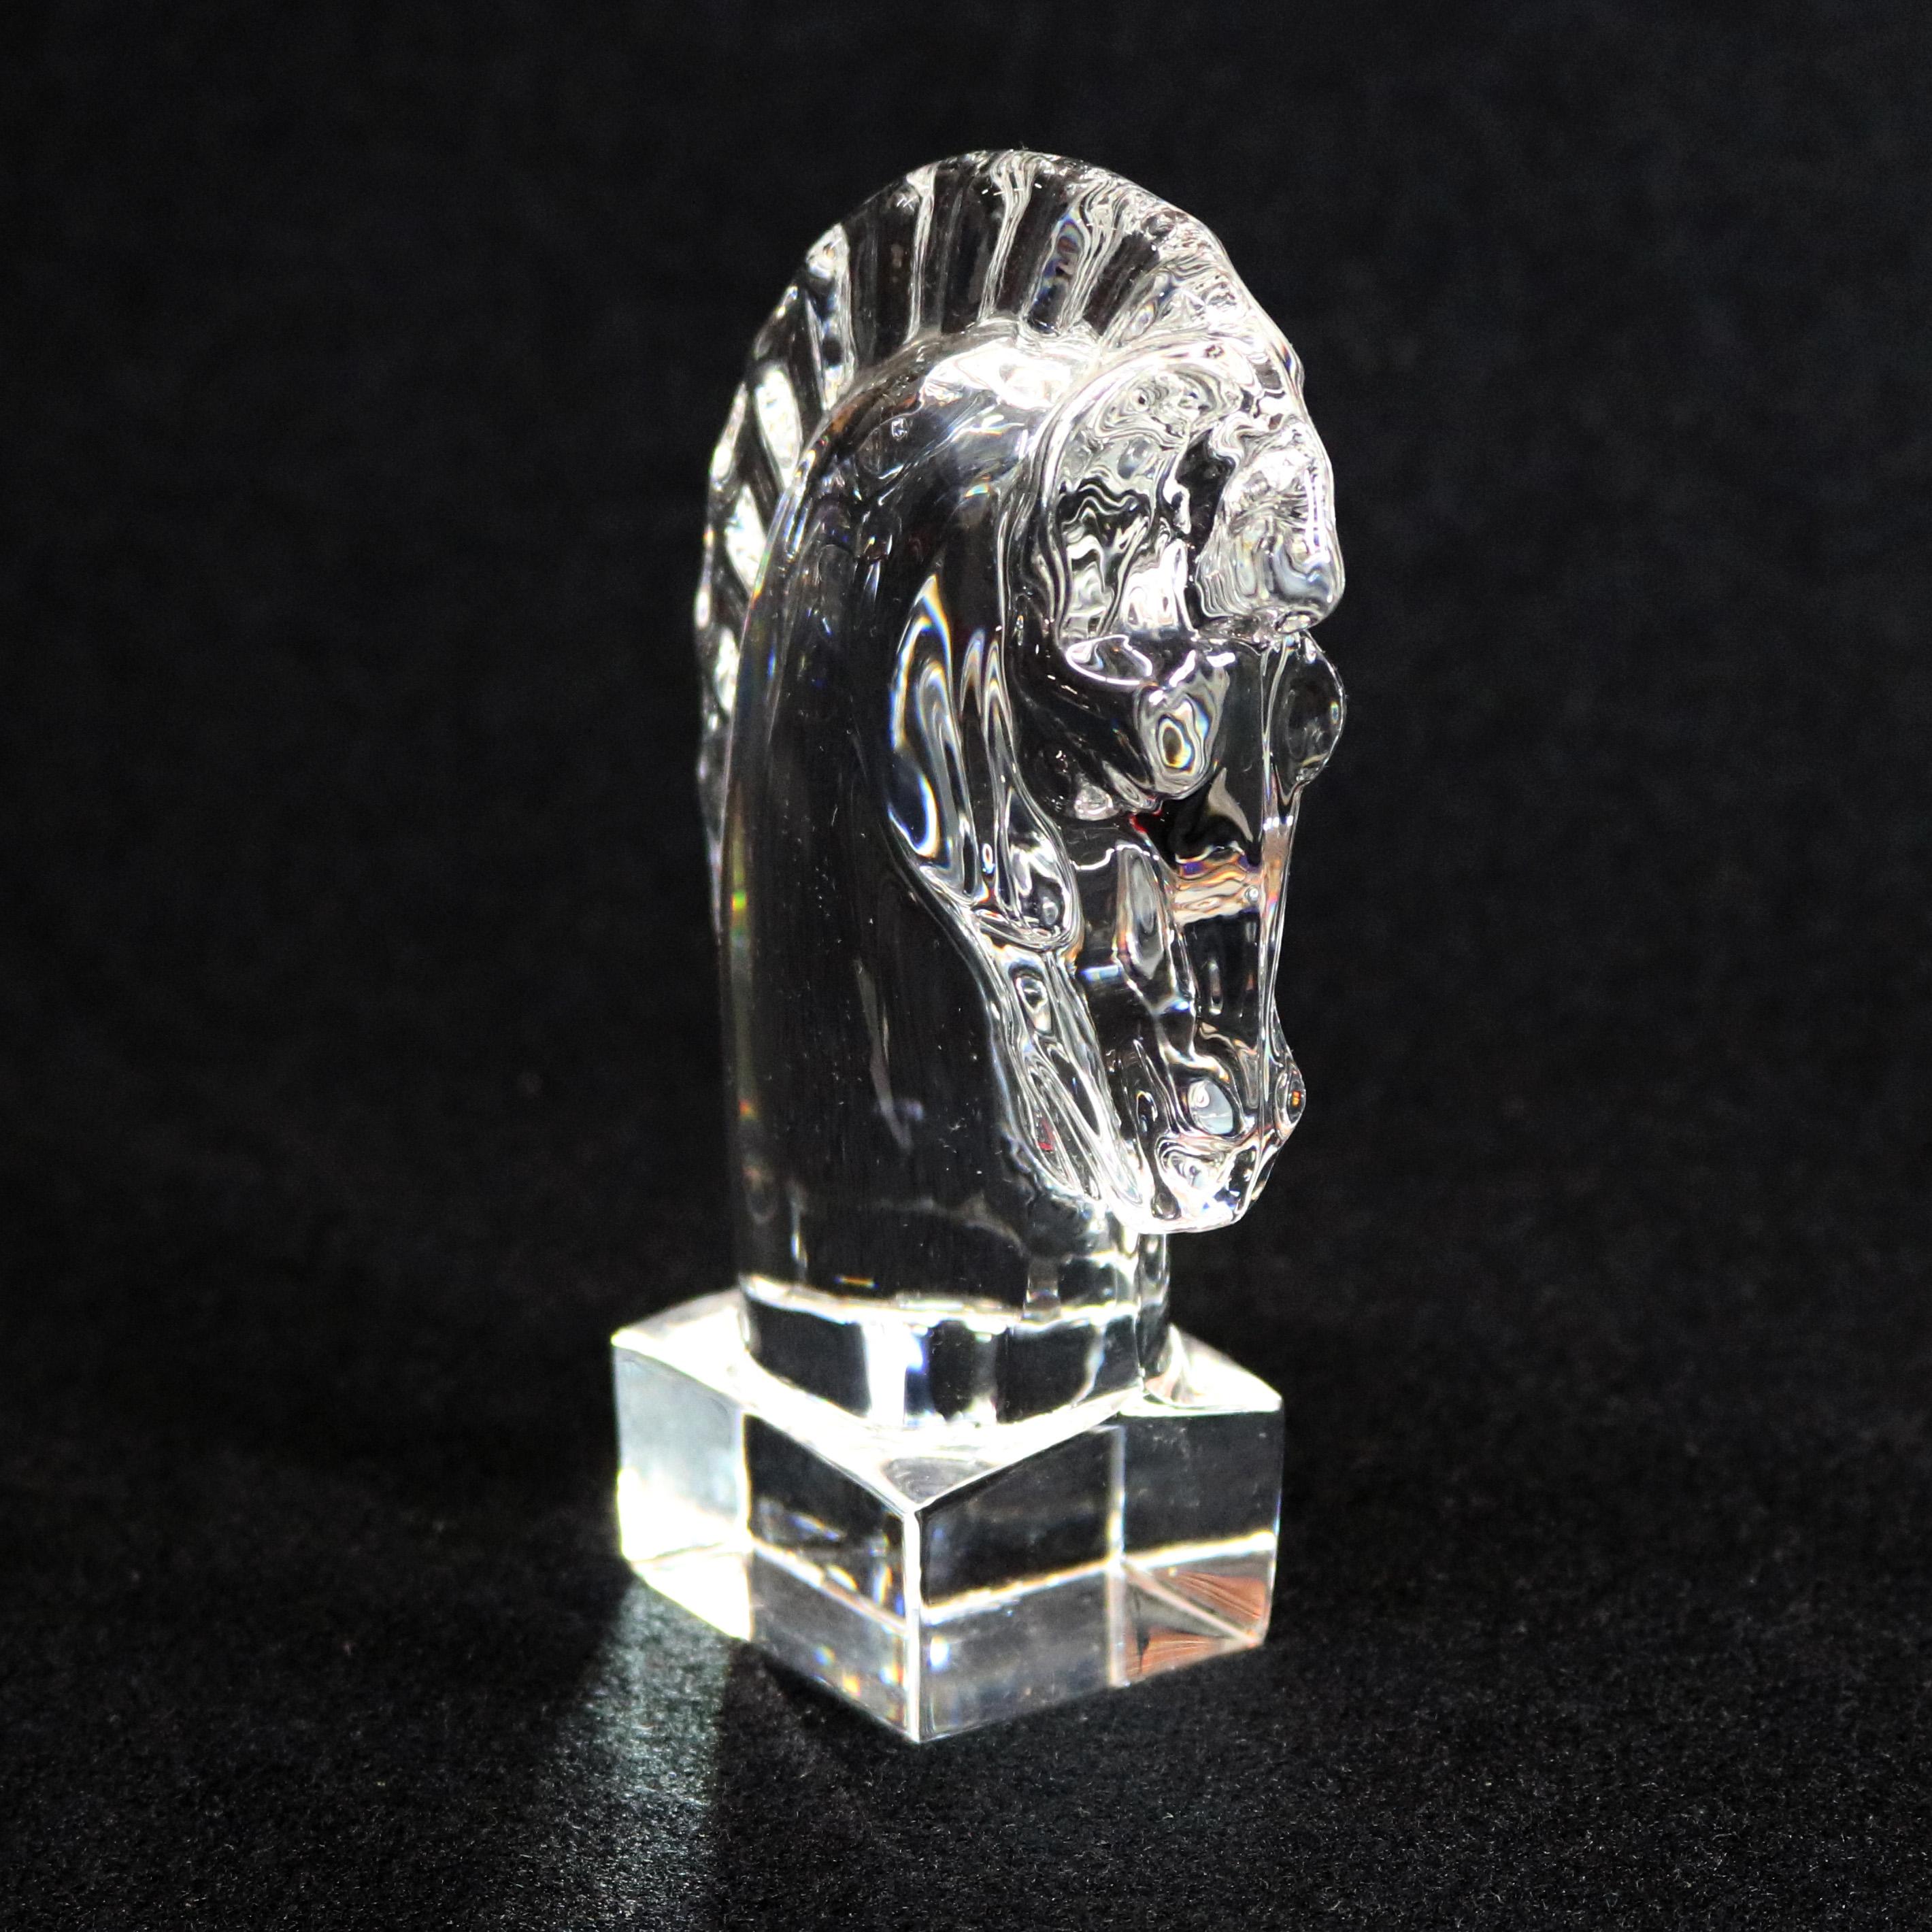 Mid-Century Modern Steuben Figurative Crystal Sculpture Knight Chess Piece Paperweight, Signed